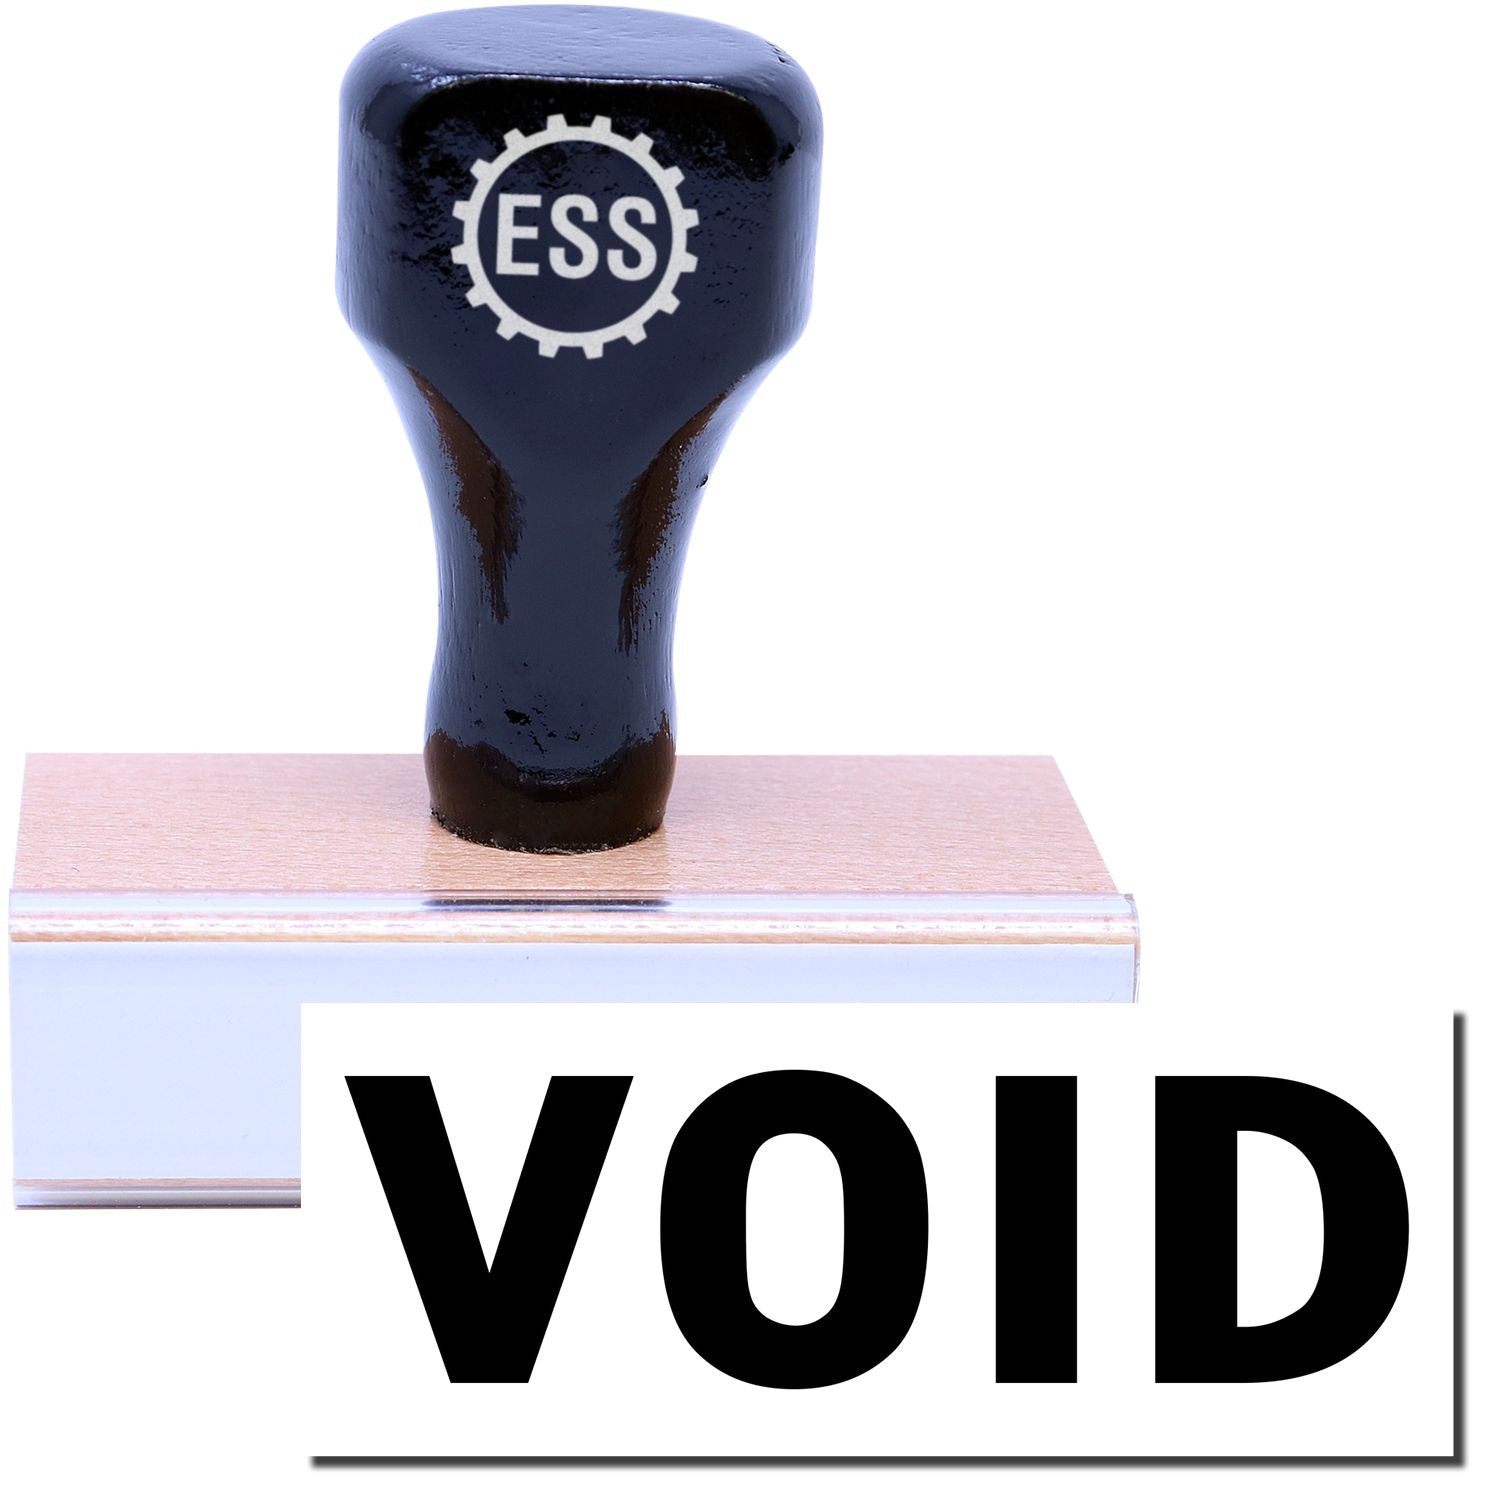 A stock office rubber stamp with a stamped image showing how the text "VOID" is displayed after stamping.